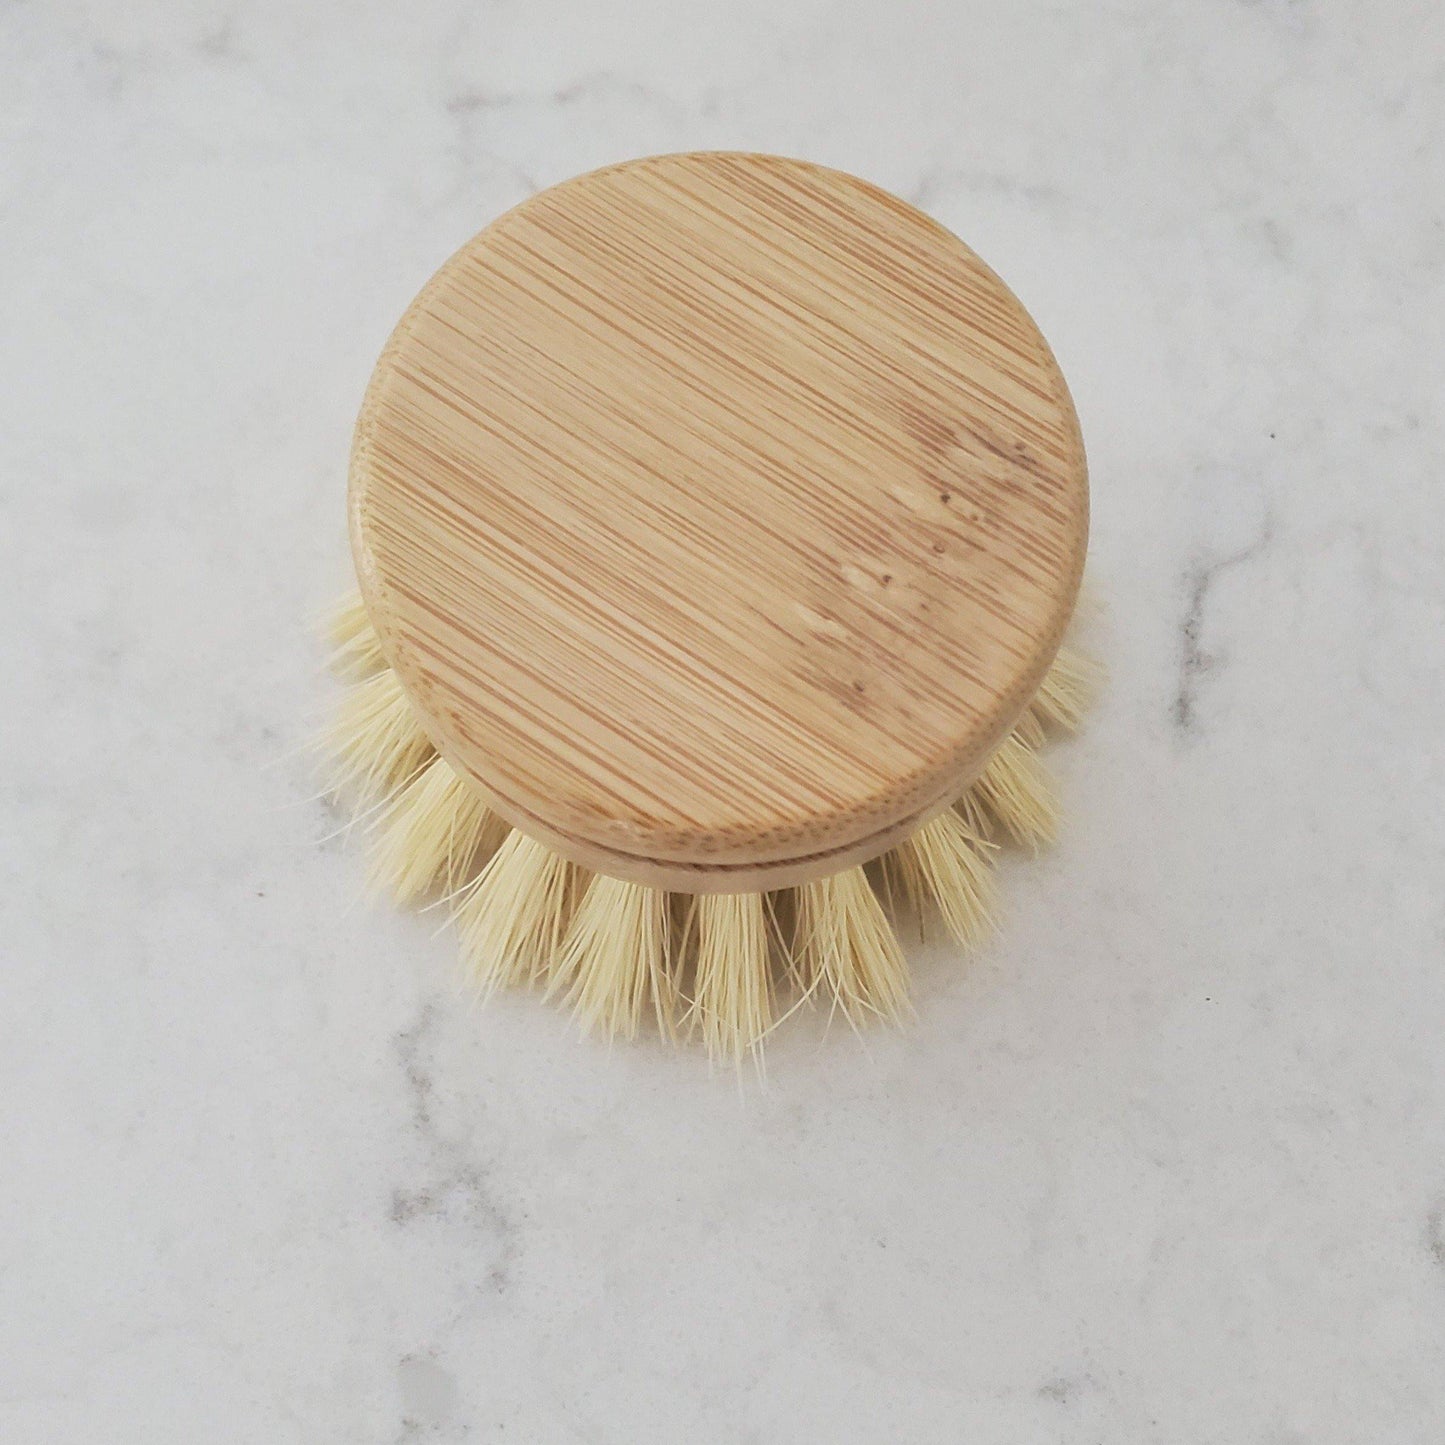 Dish Scrubber - Replacement Head  for long handle brush - Earth Warrior Lifestyle